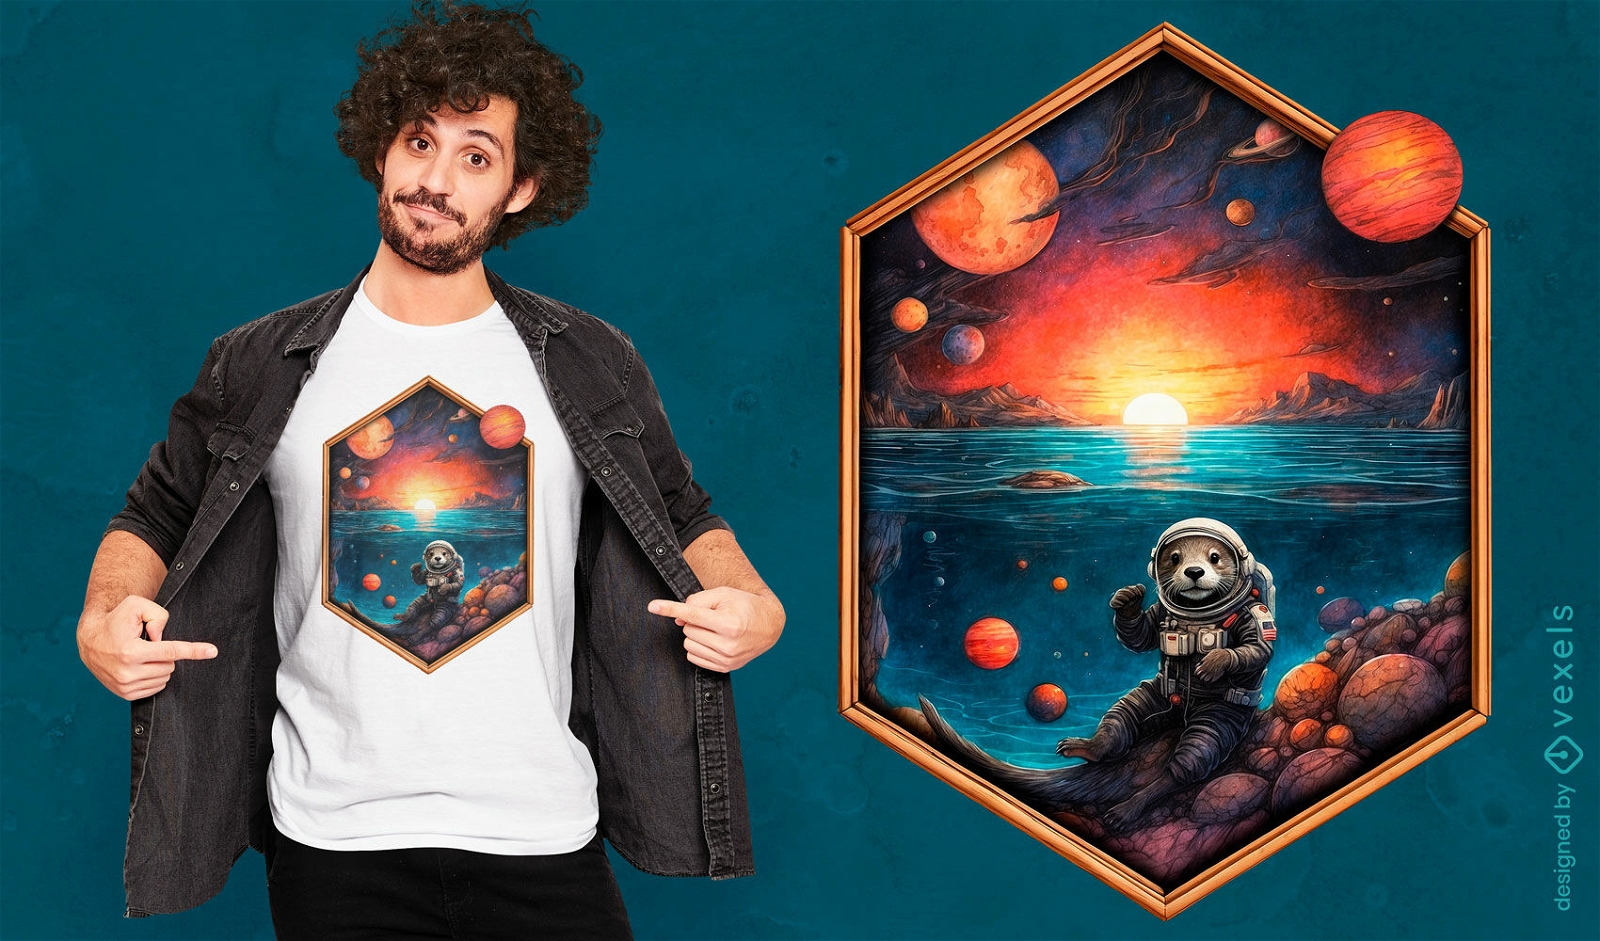 Otter astronaut in space t-shirt design